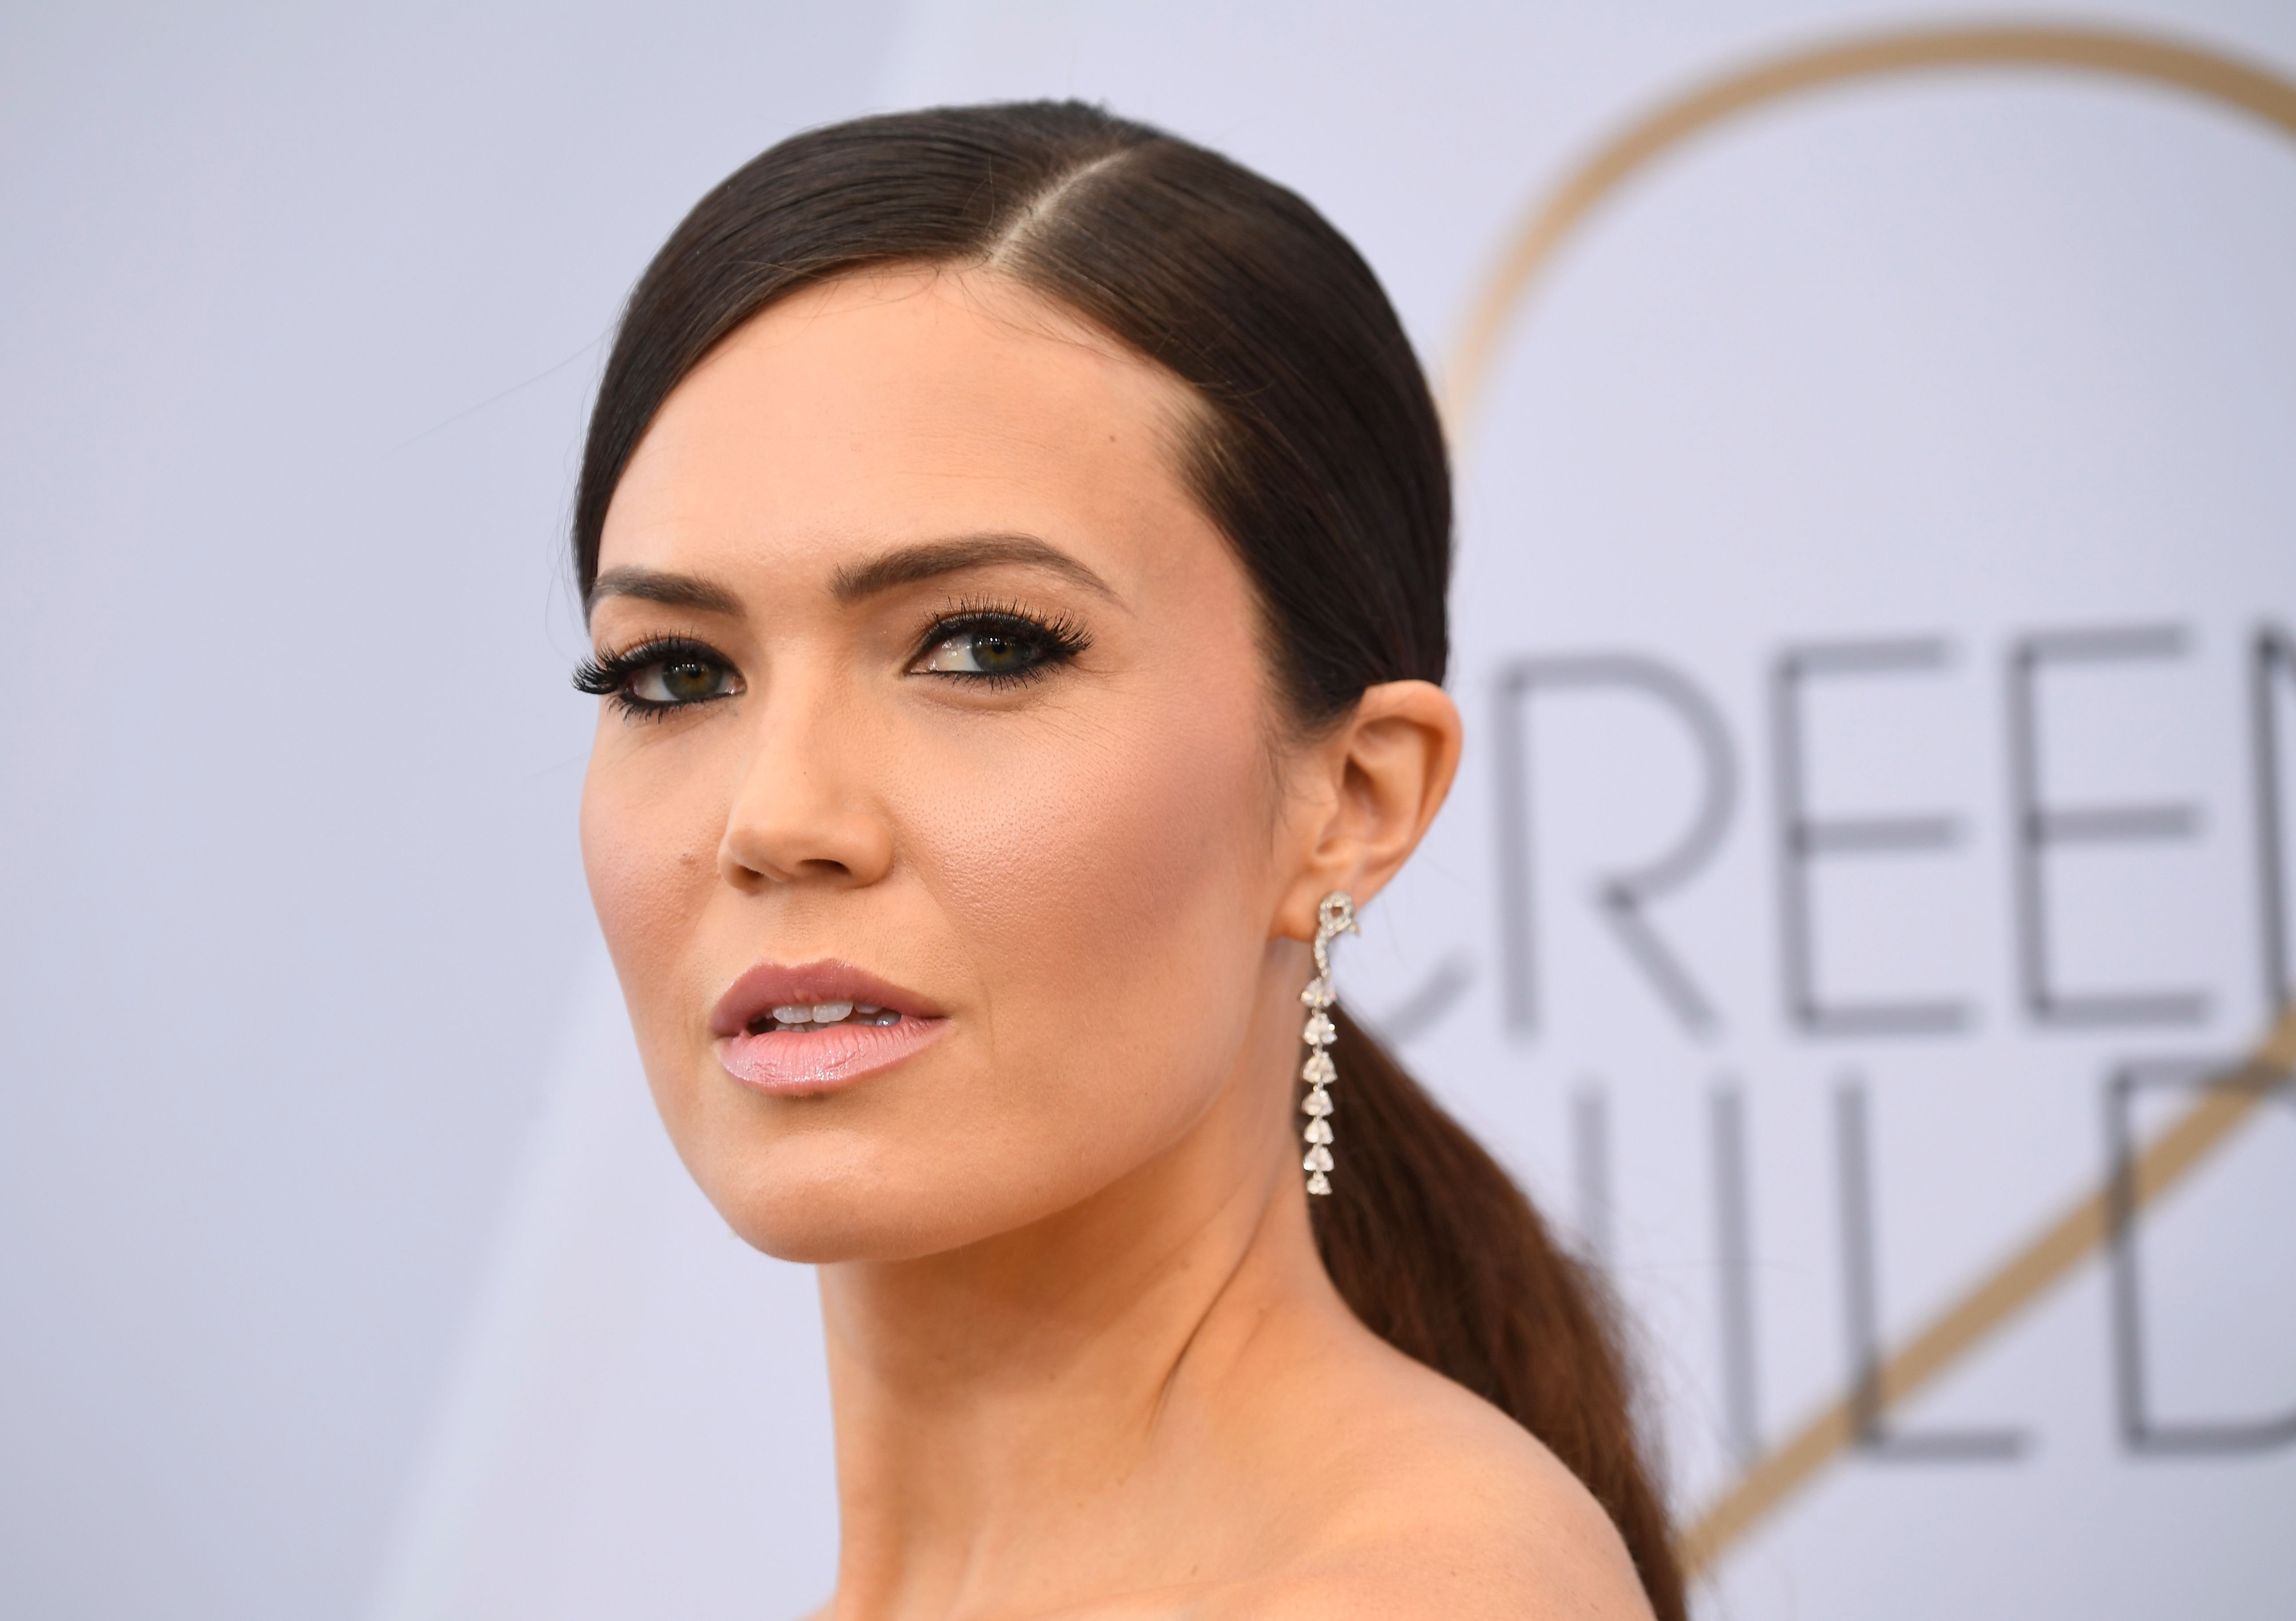 Mandy Moore at the 25th Annual Screen Actors Guild Awards on January 27, 2019, in Los Angeles, California | Photo: Frazer Harrison/Getty Images